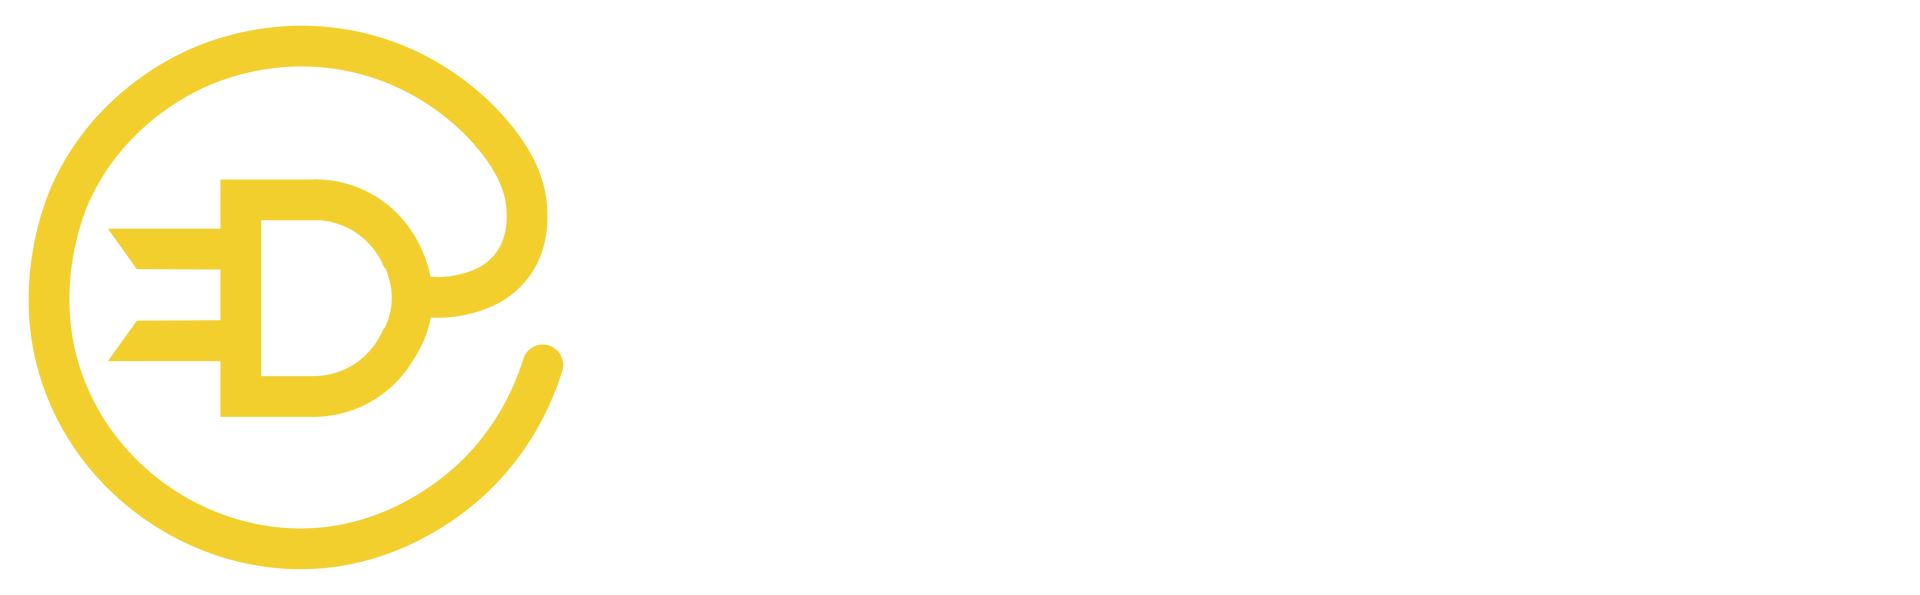 Murphy's Electrical & Data: Professional Electricians in Shoalhaven